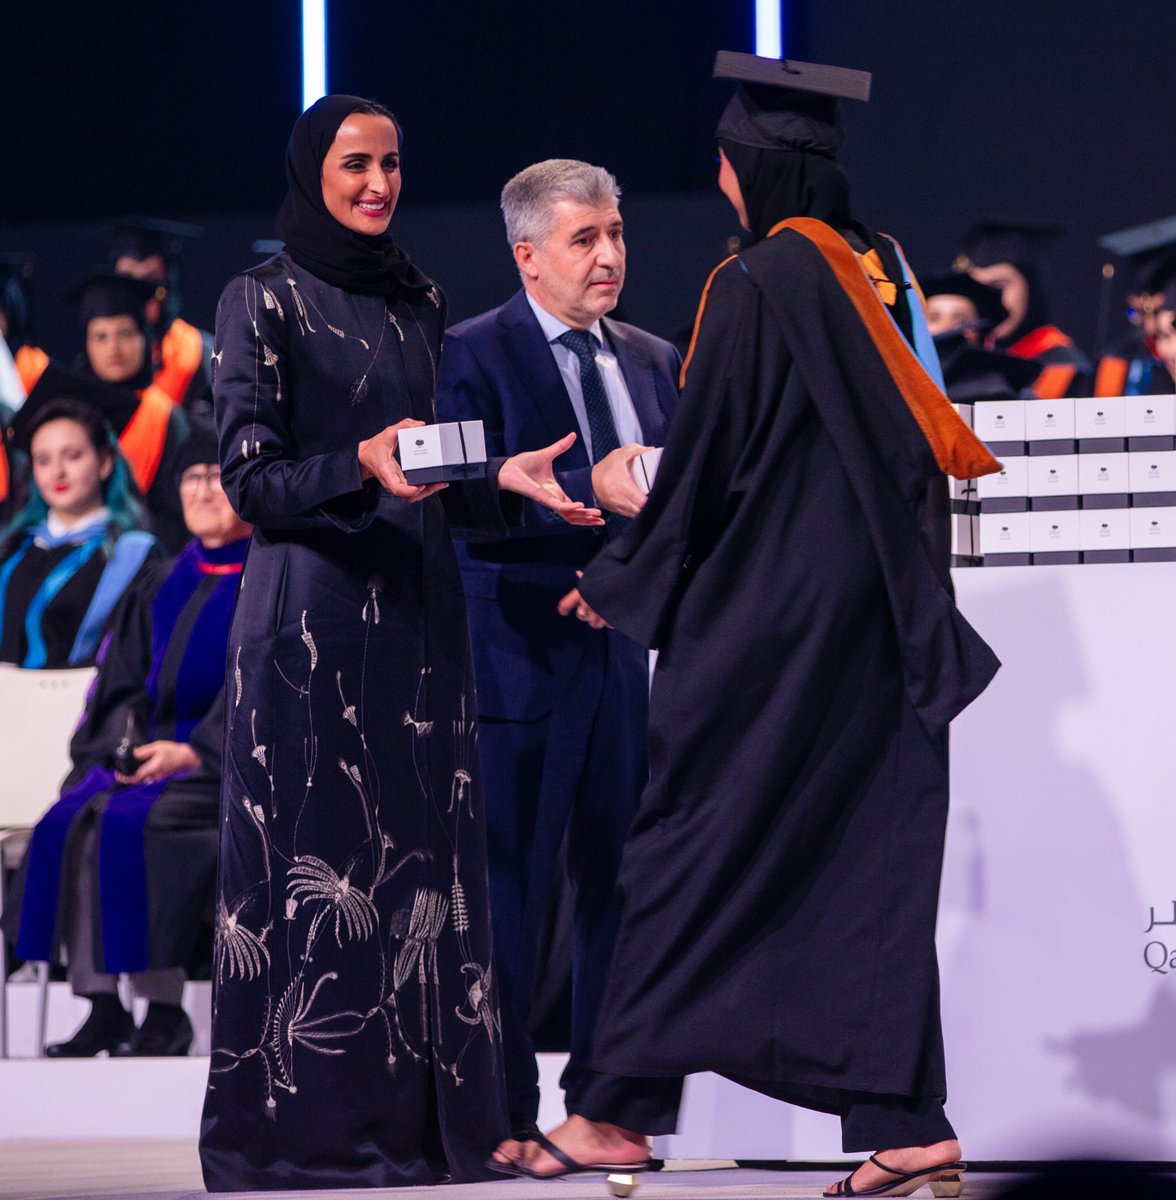 Congrats, #Classof2024!🎓🎉 Your years of hard work and dedication have paid off. As you enter this next chapter of your lives, we wish you best and encourage you to remain lifelong learners and change makers. #QFConvocation @mozabintnasser